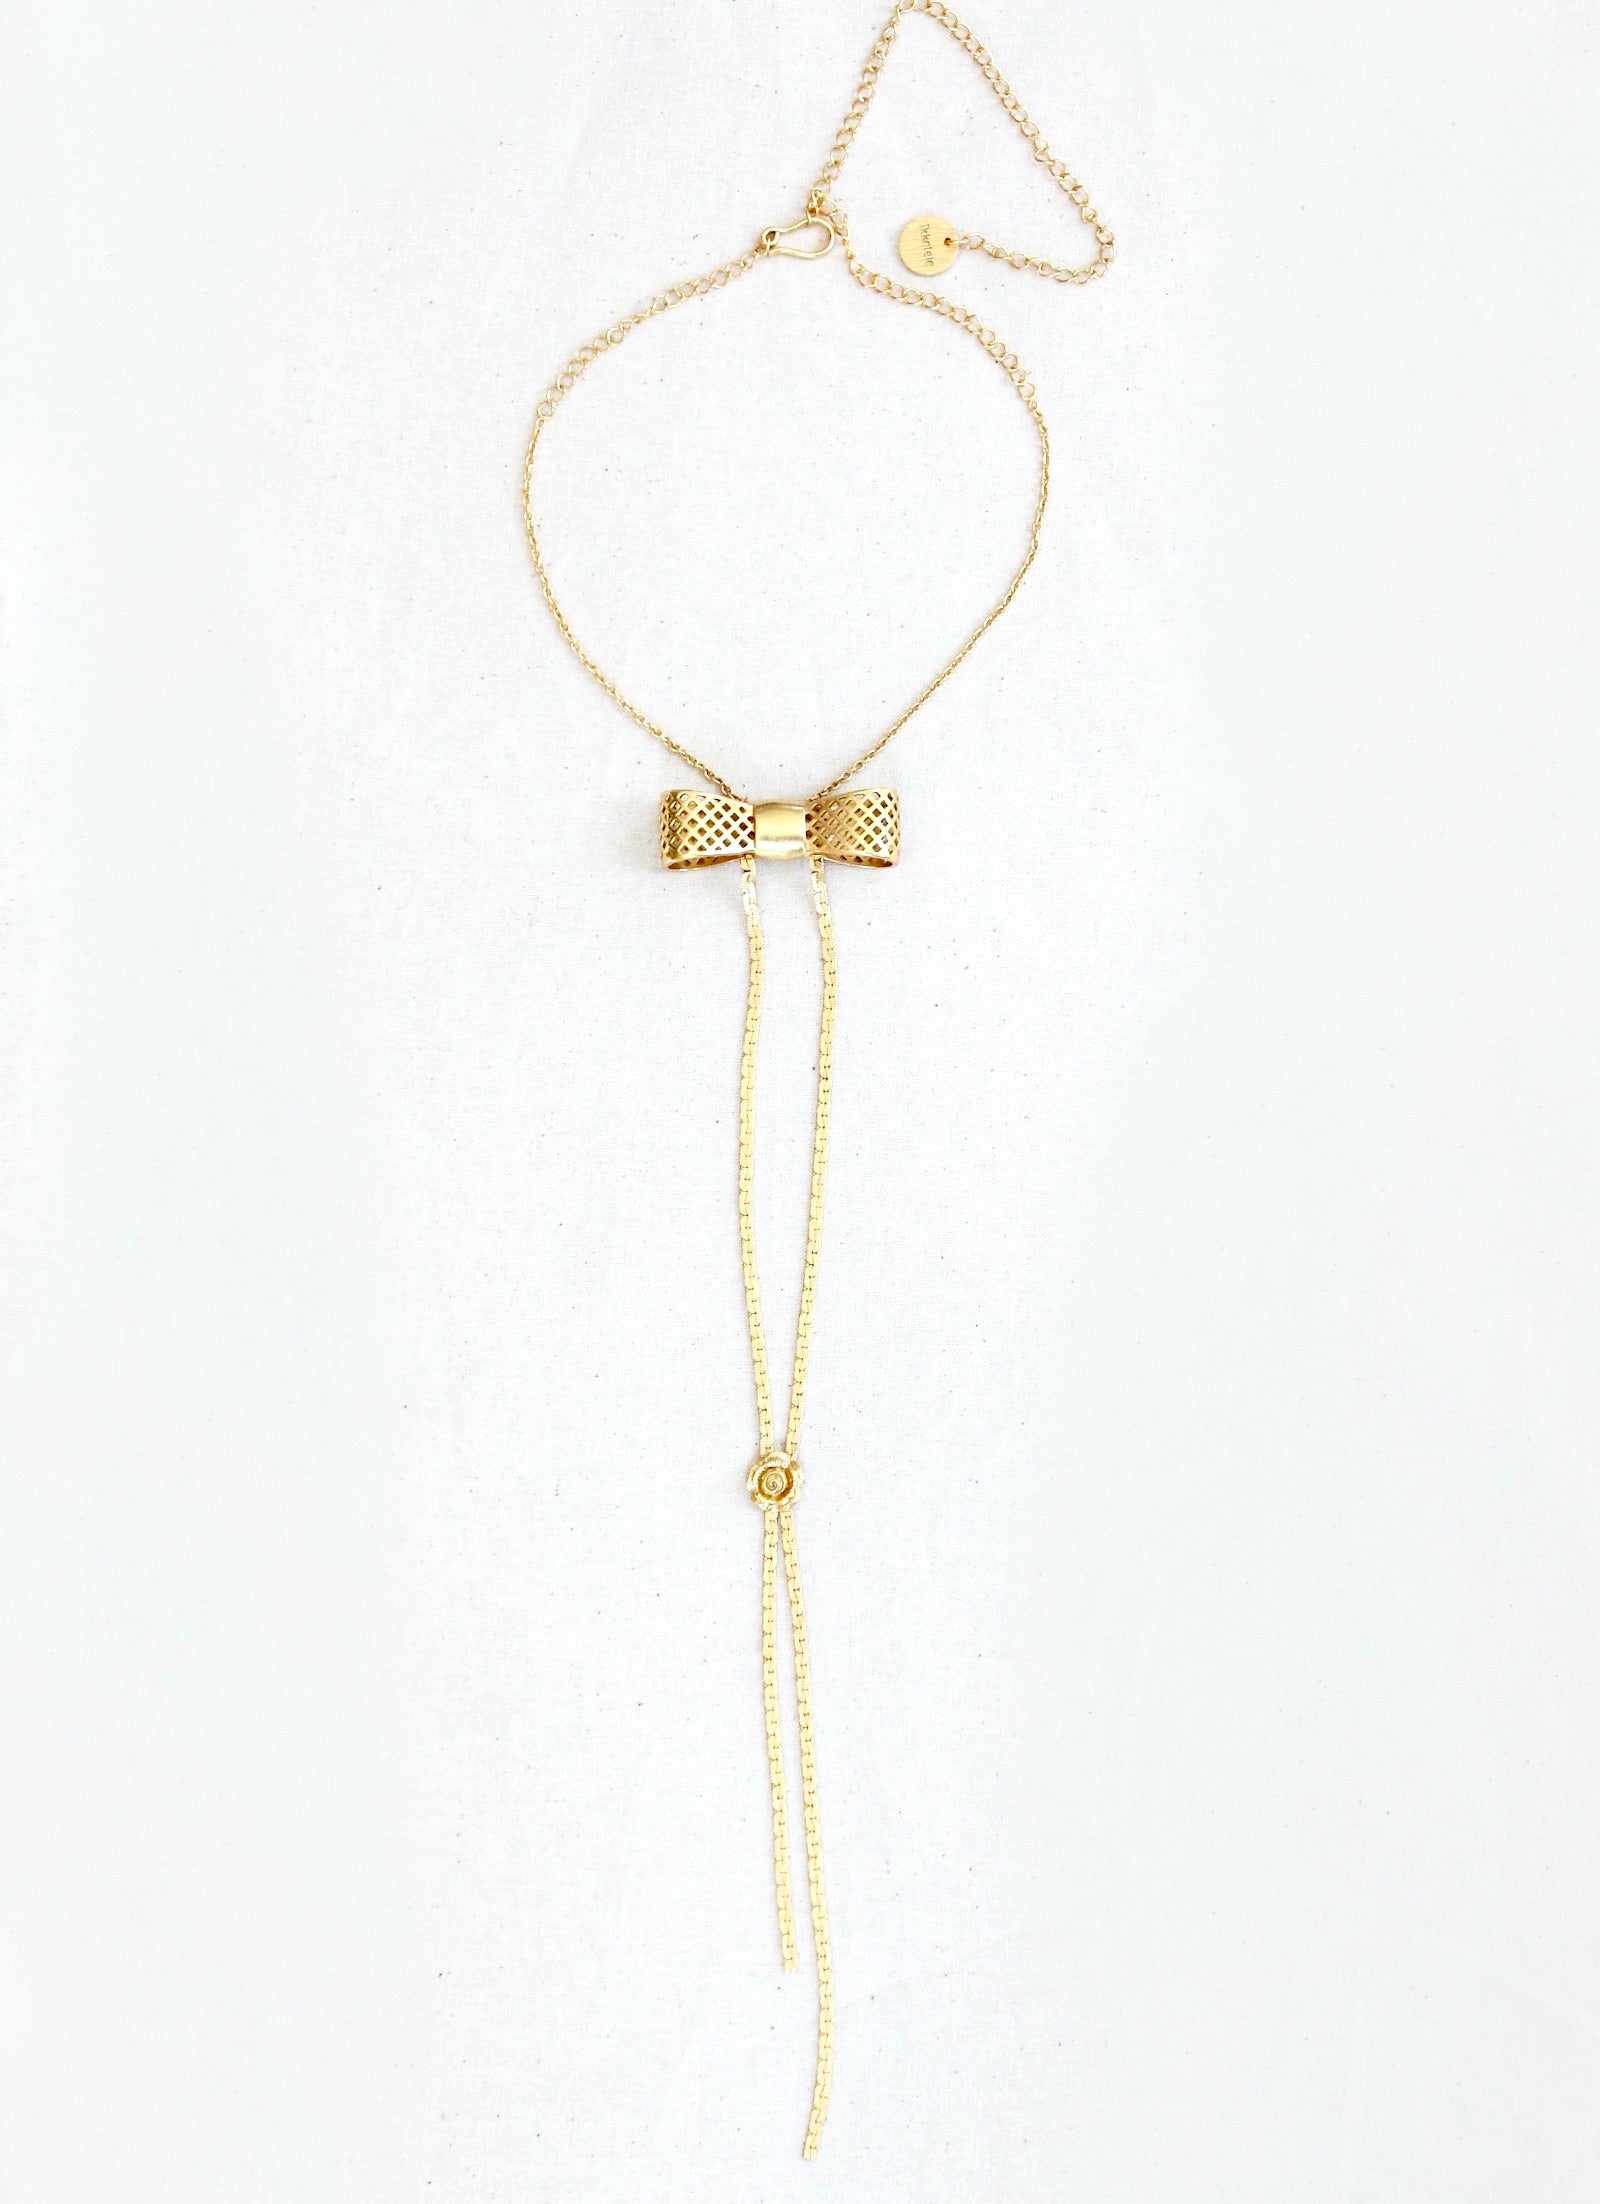 BOW & ROSE NECKLACE